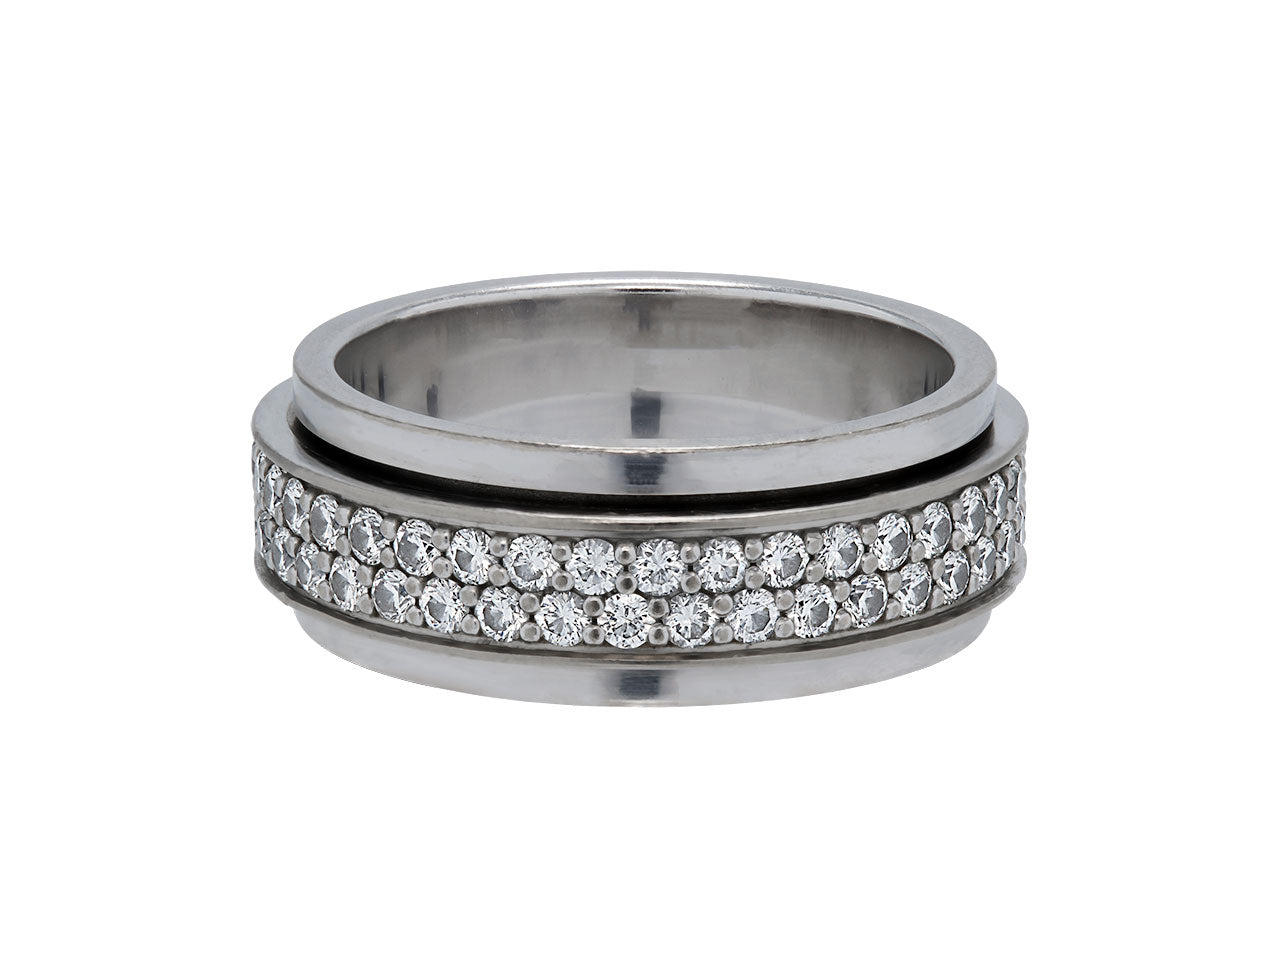 Piaget 'Possession' Diamond Band in 18K White Gold